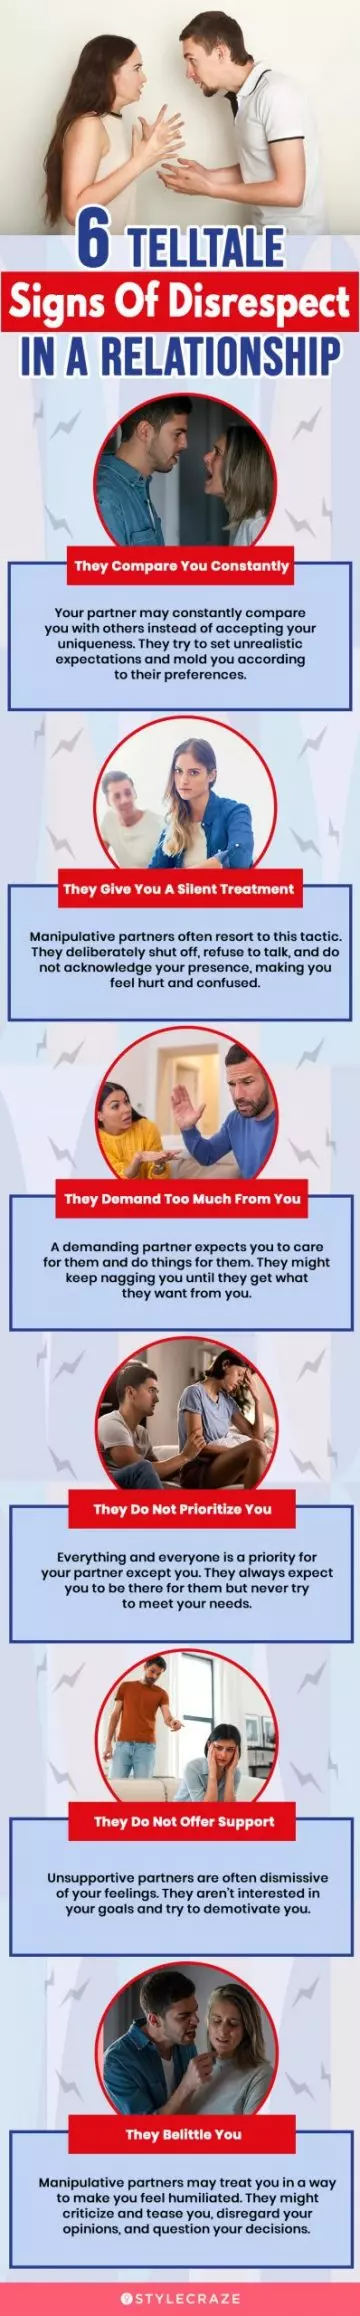 6 telltale signs of disrespect in a relationship (infographic)